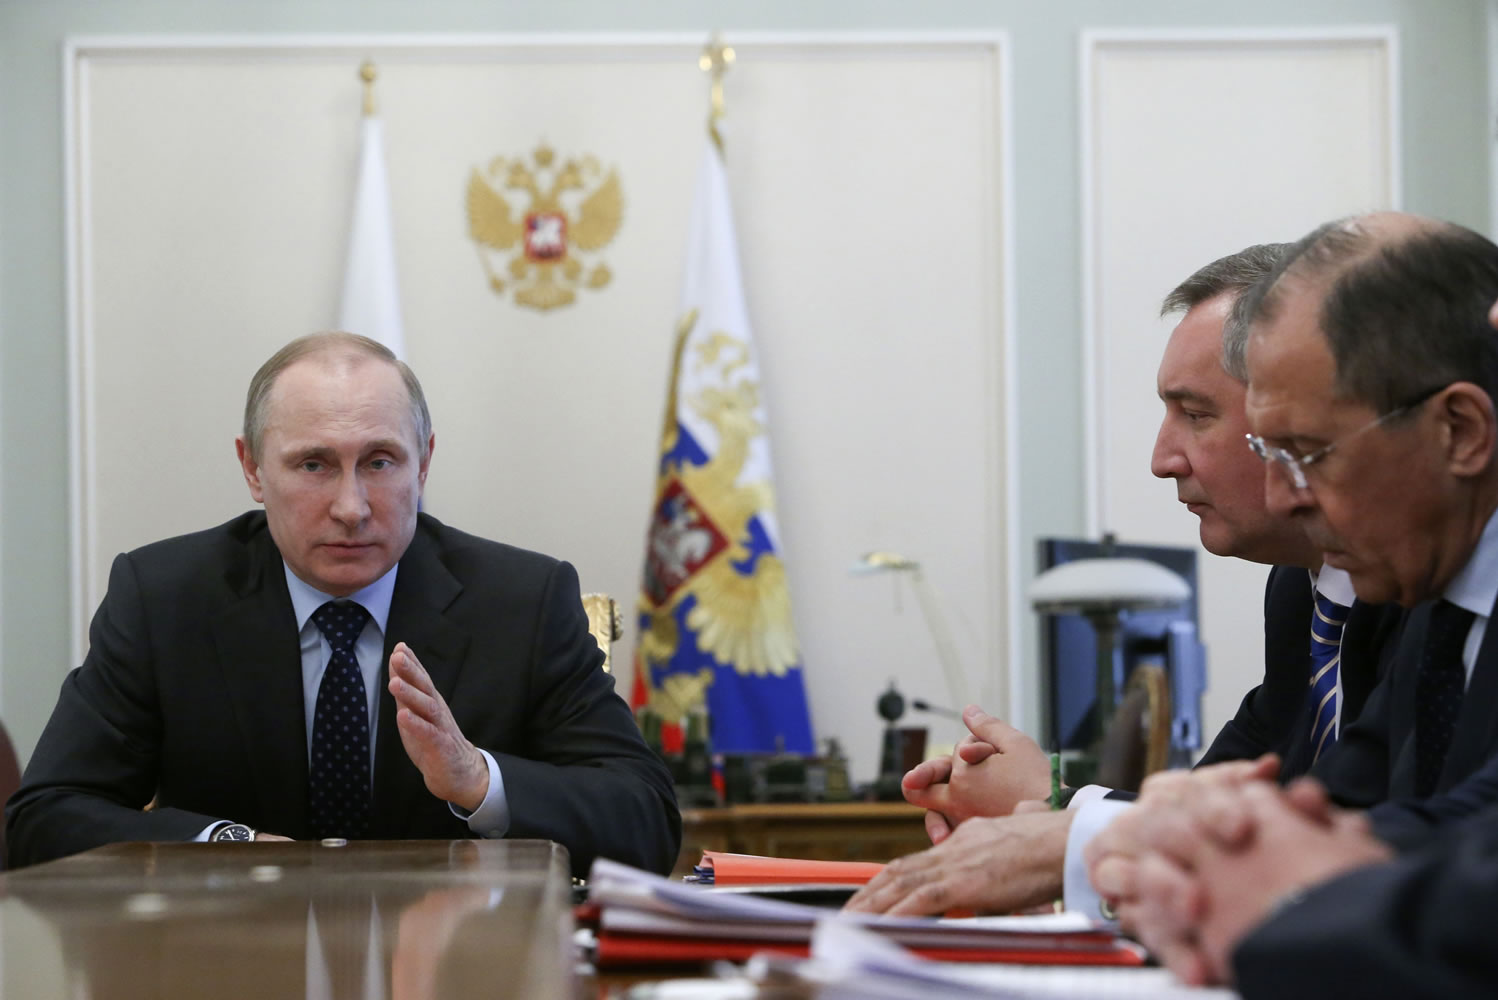 Russian President Vladimir Putin speaks at a Cabinet meeting in the Novo-Ogaryovo residence outside Moscow, Wednesday.